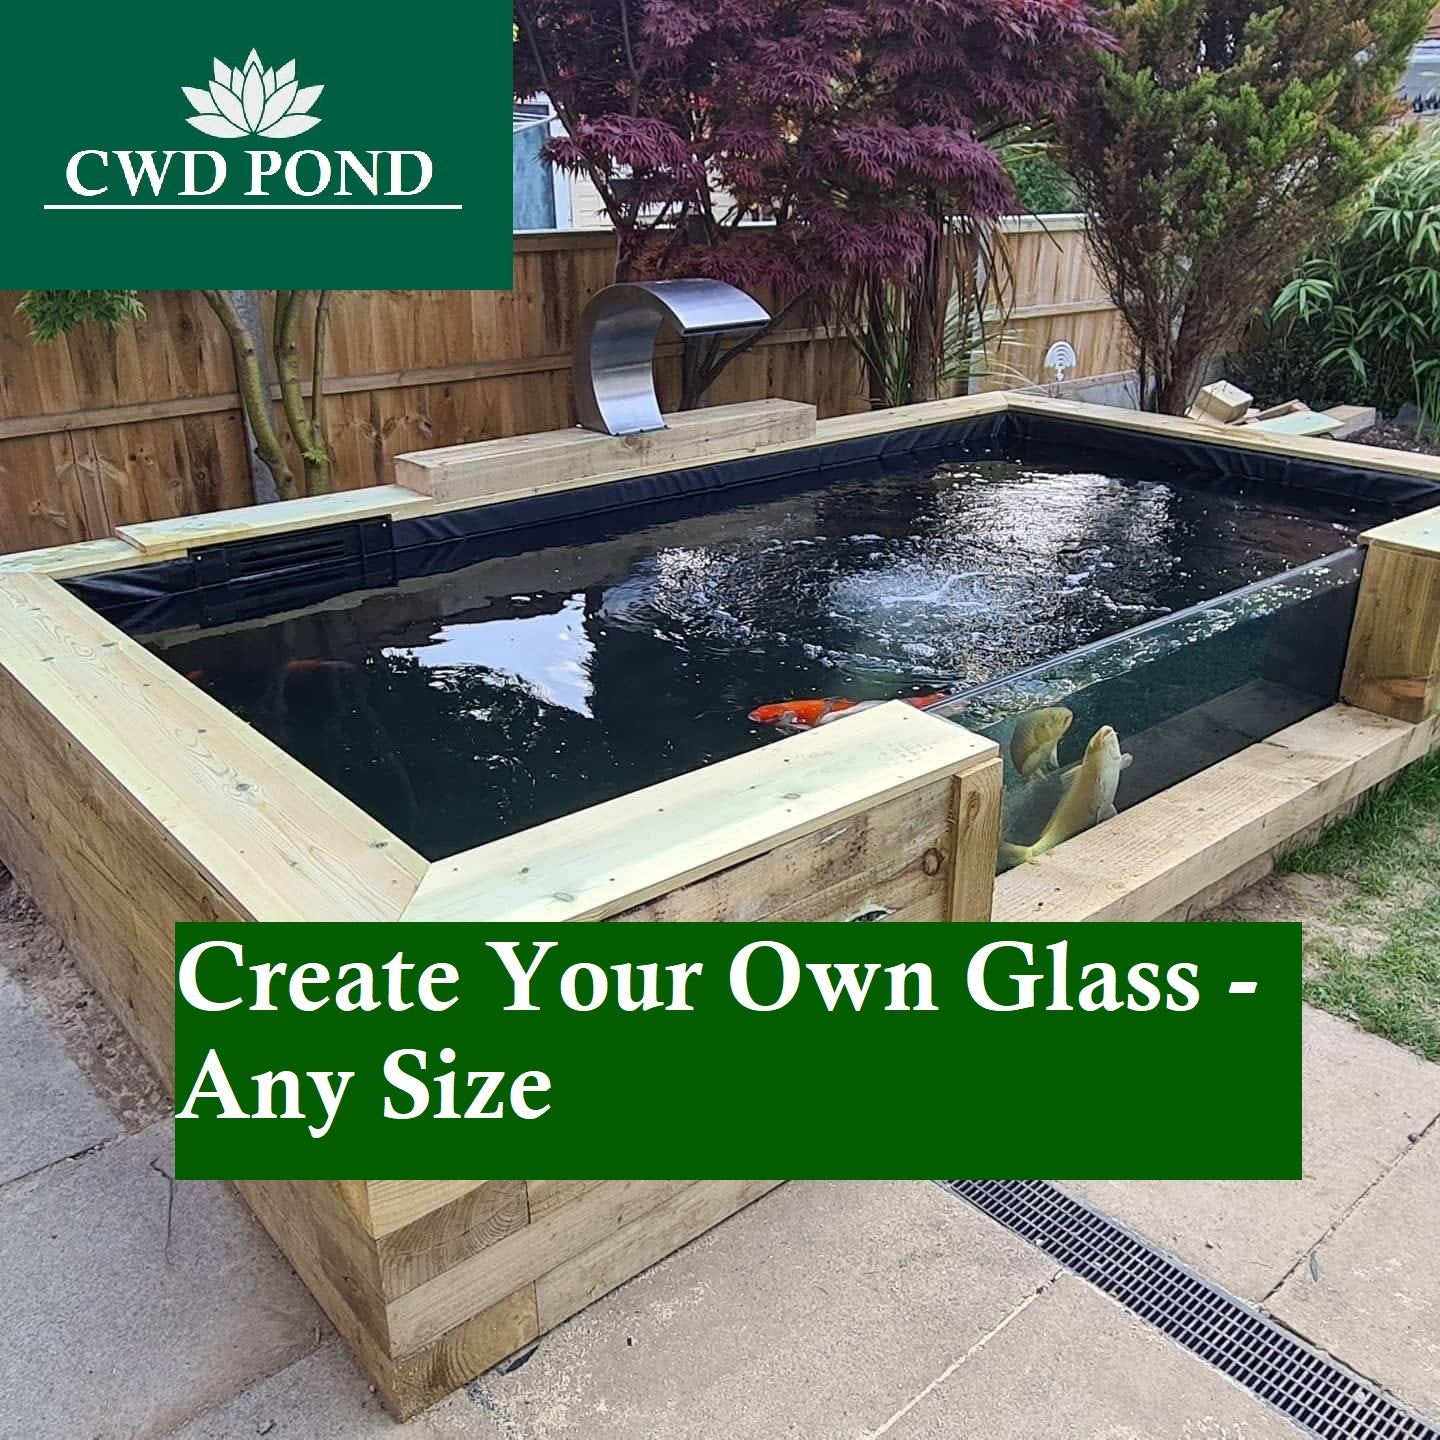 Bespoke Koi Pond Viewing Window Glass - Highest Quality Made To The mm